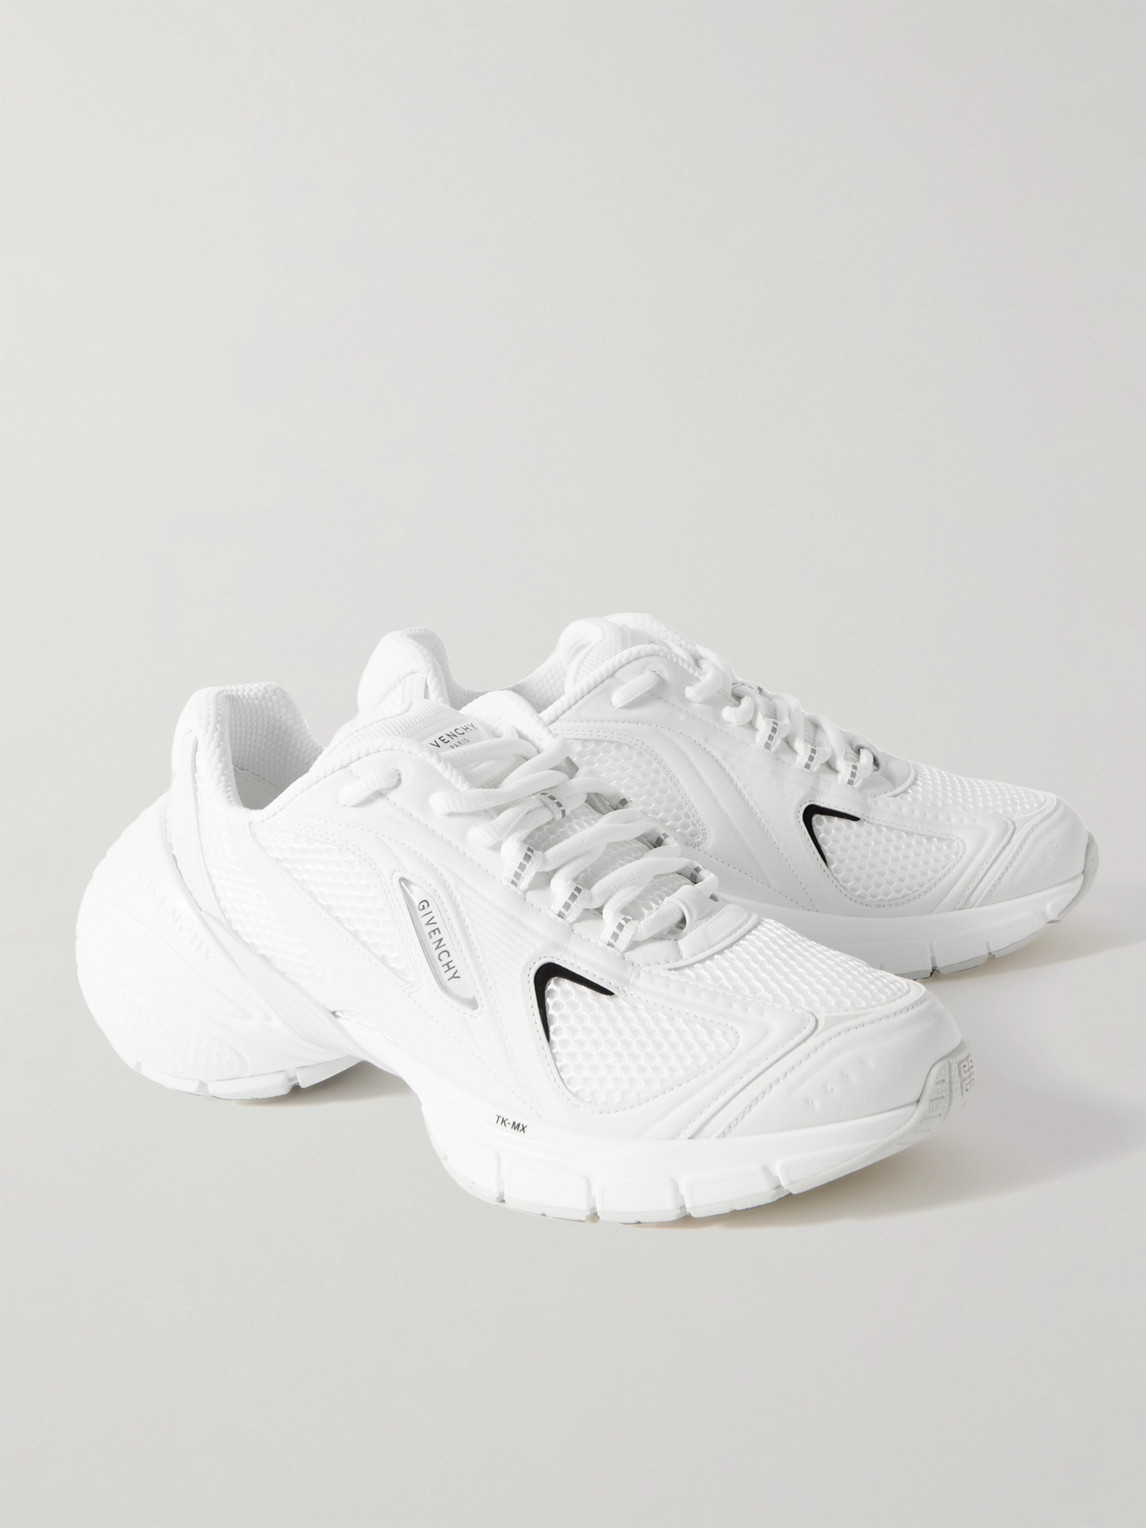 Givenchy Tk-mx Mesh, Rubber And Faux Leather Sneakers In White 